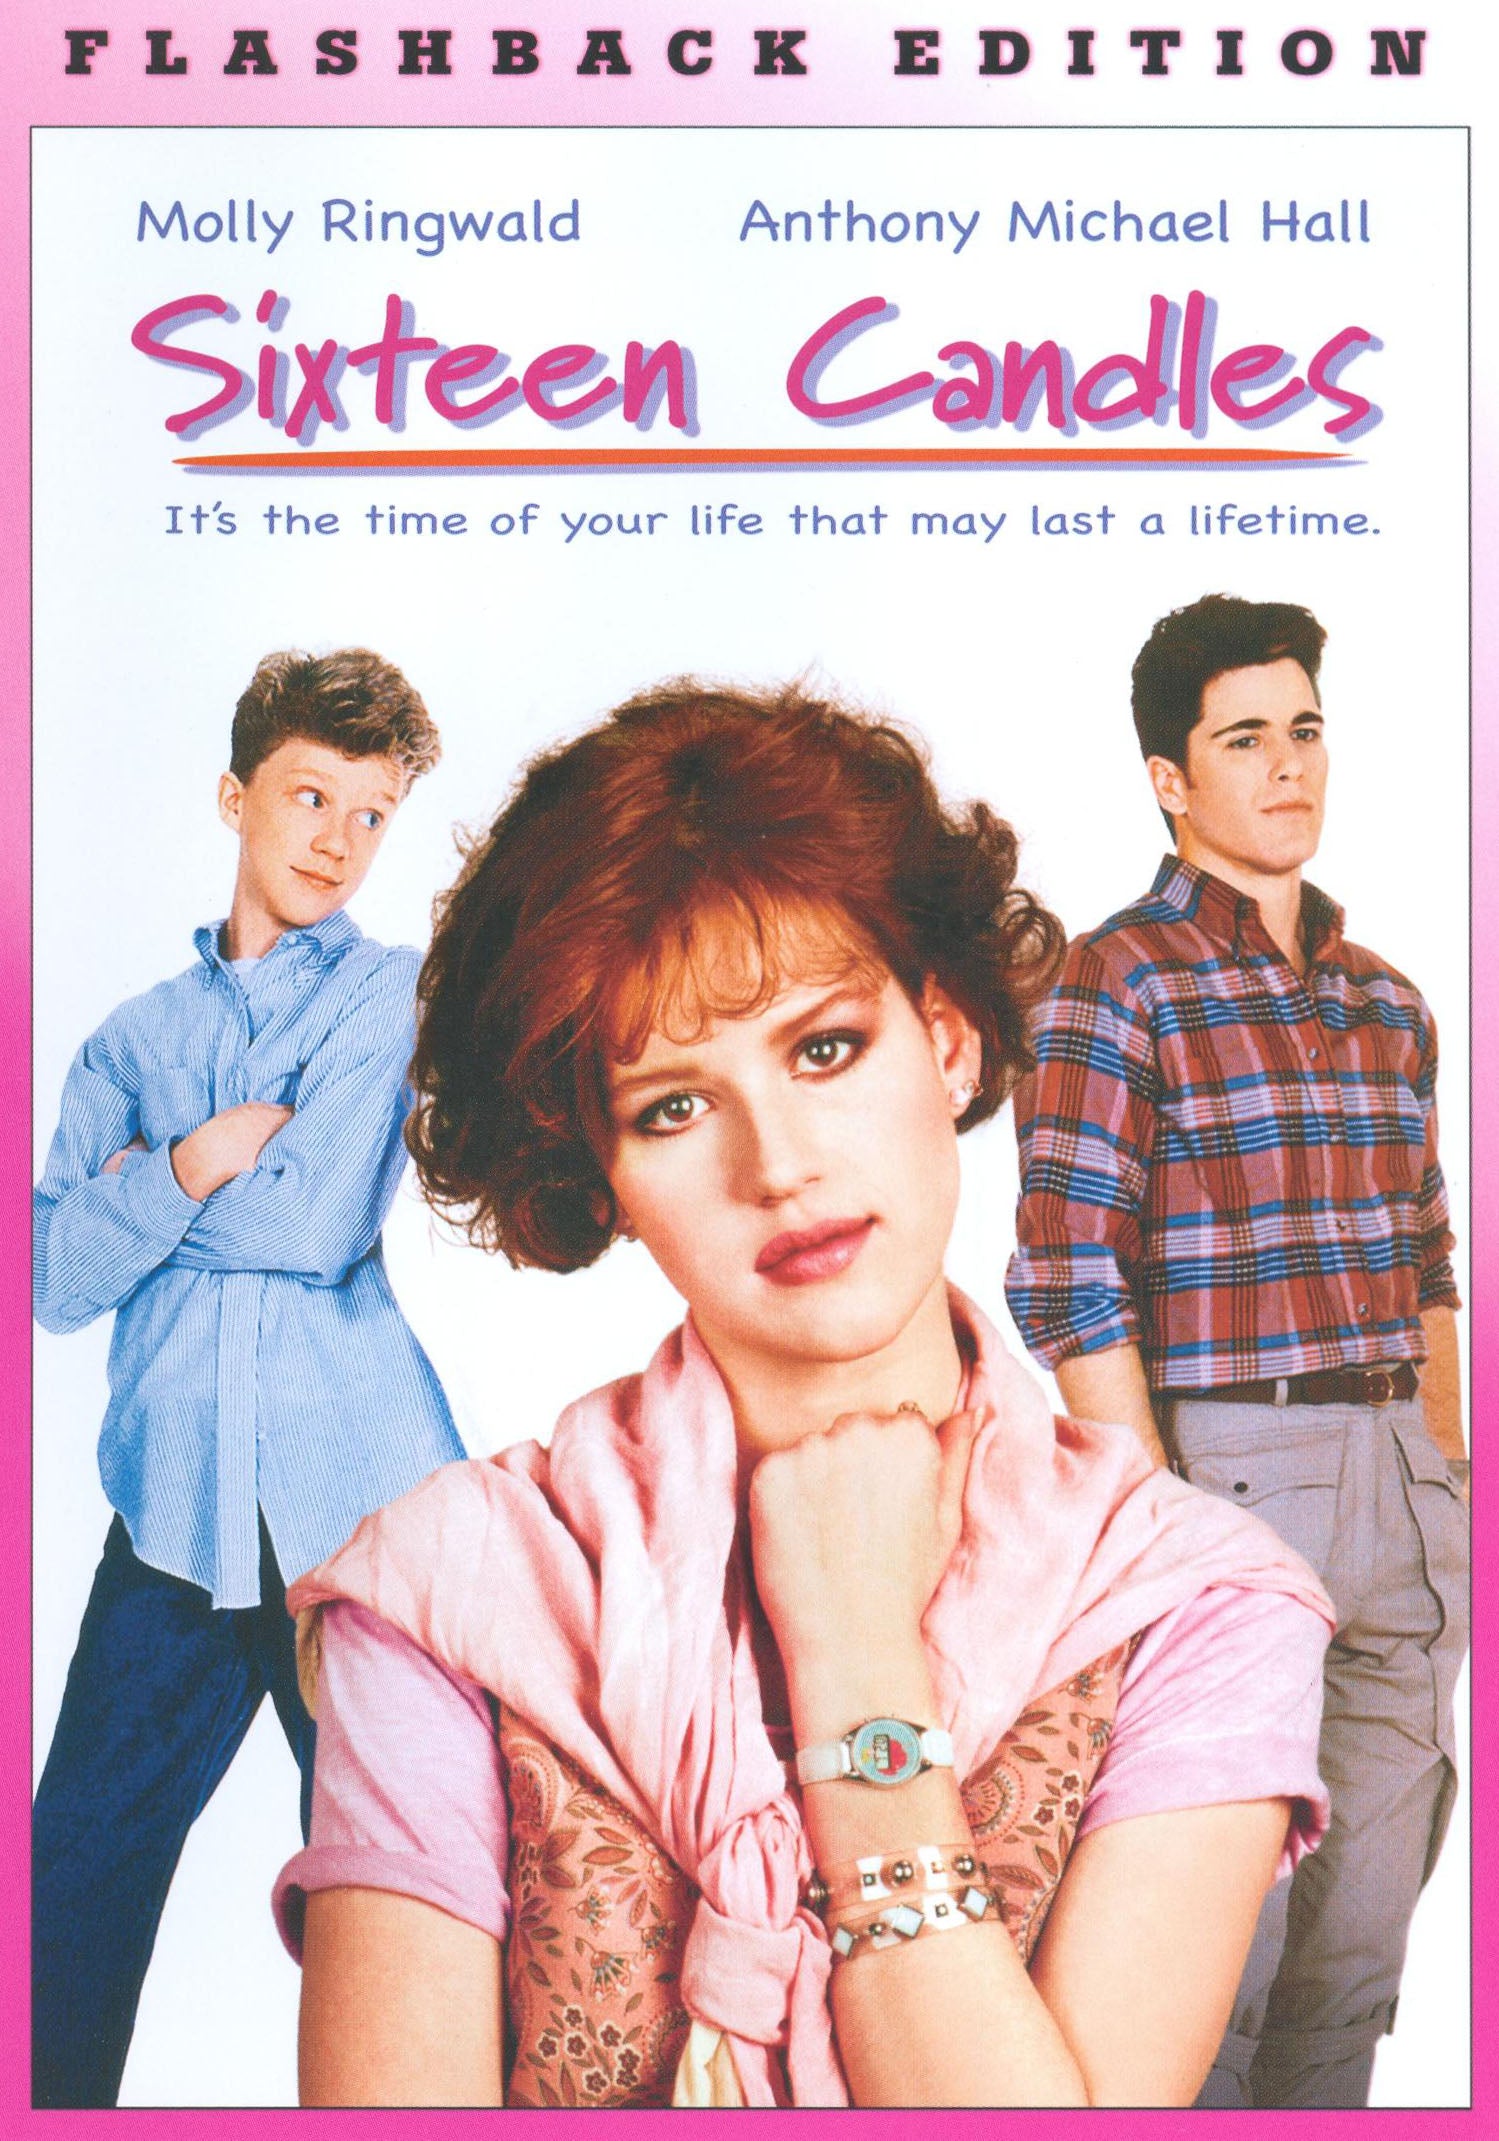 Sixteen Candles [Flashback Edition] cover art